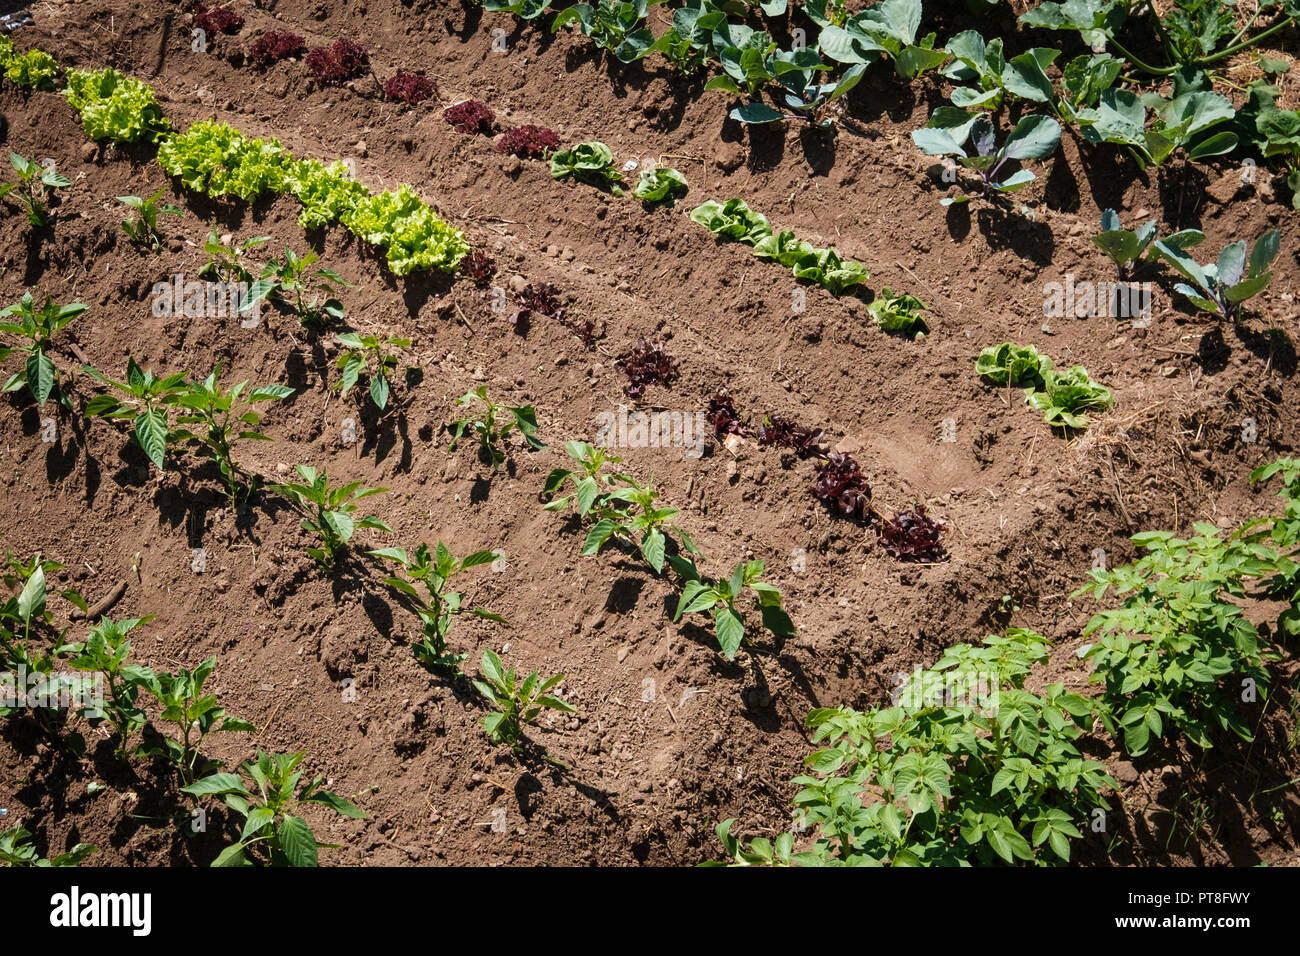 small vegetable plants growing in garden bed Stock Photo